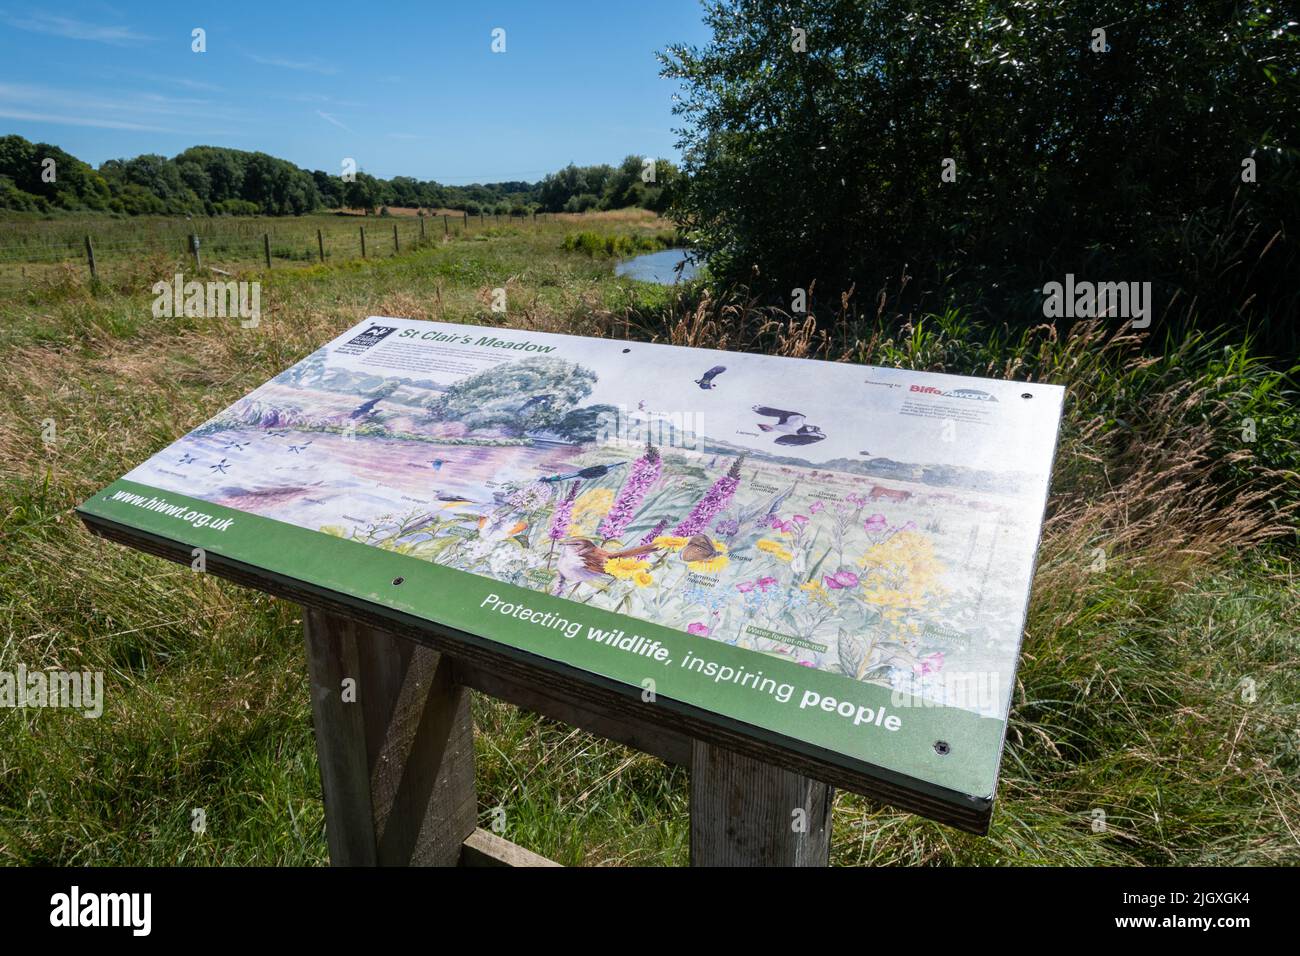 St Clair's Meadow, an information board at the nature reserve managed by Hampshire and Isle of Wight Wildlife Trust, Soberton, Hampshire, England, UK Stock Photo